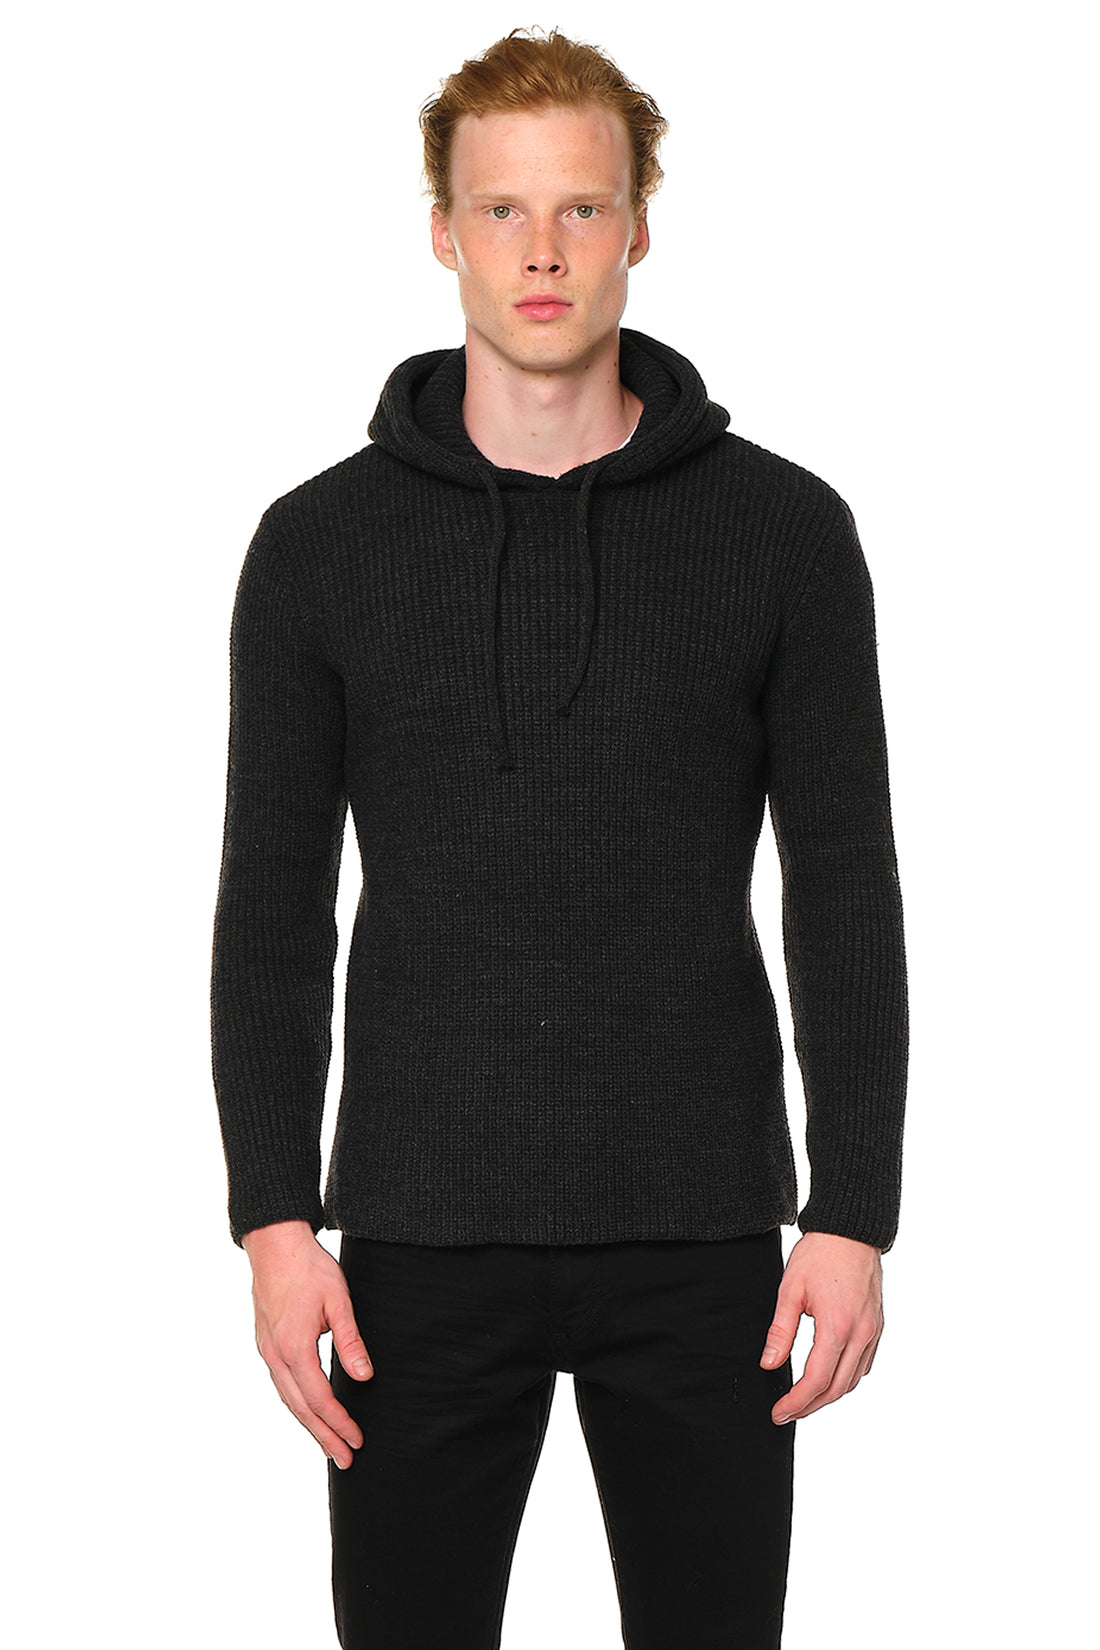 DRAWSTRING HOODED SWEATER - ANTHRACITE - Ron Tomson